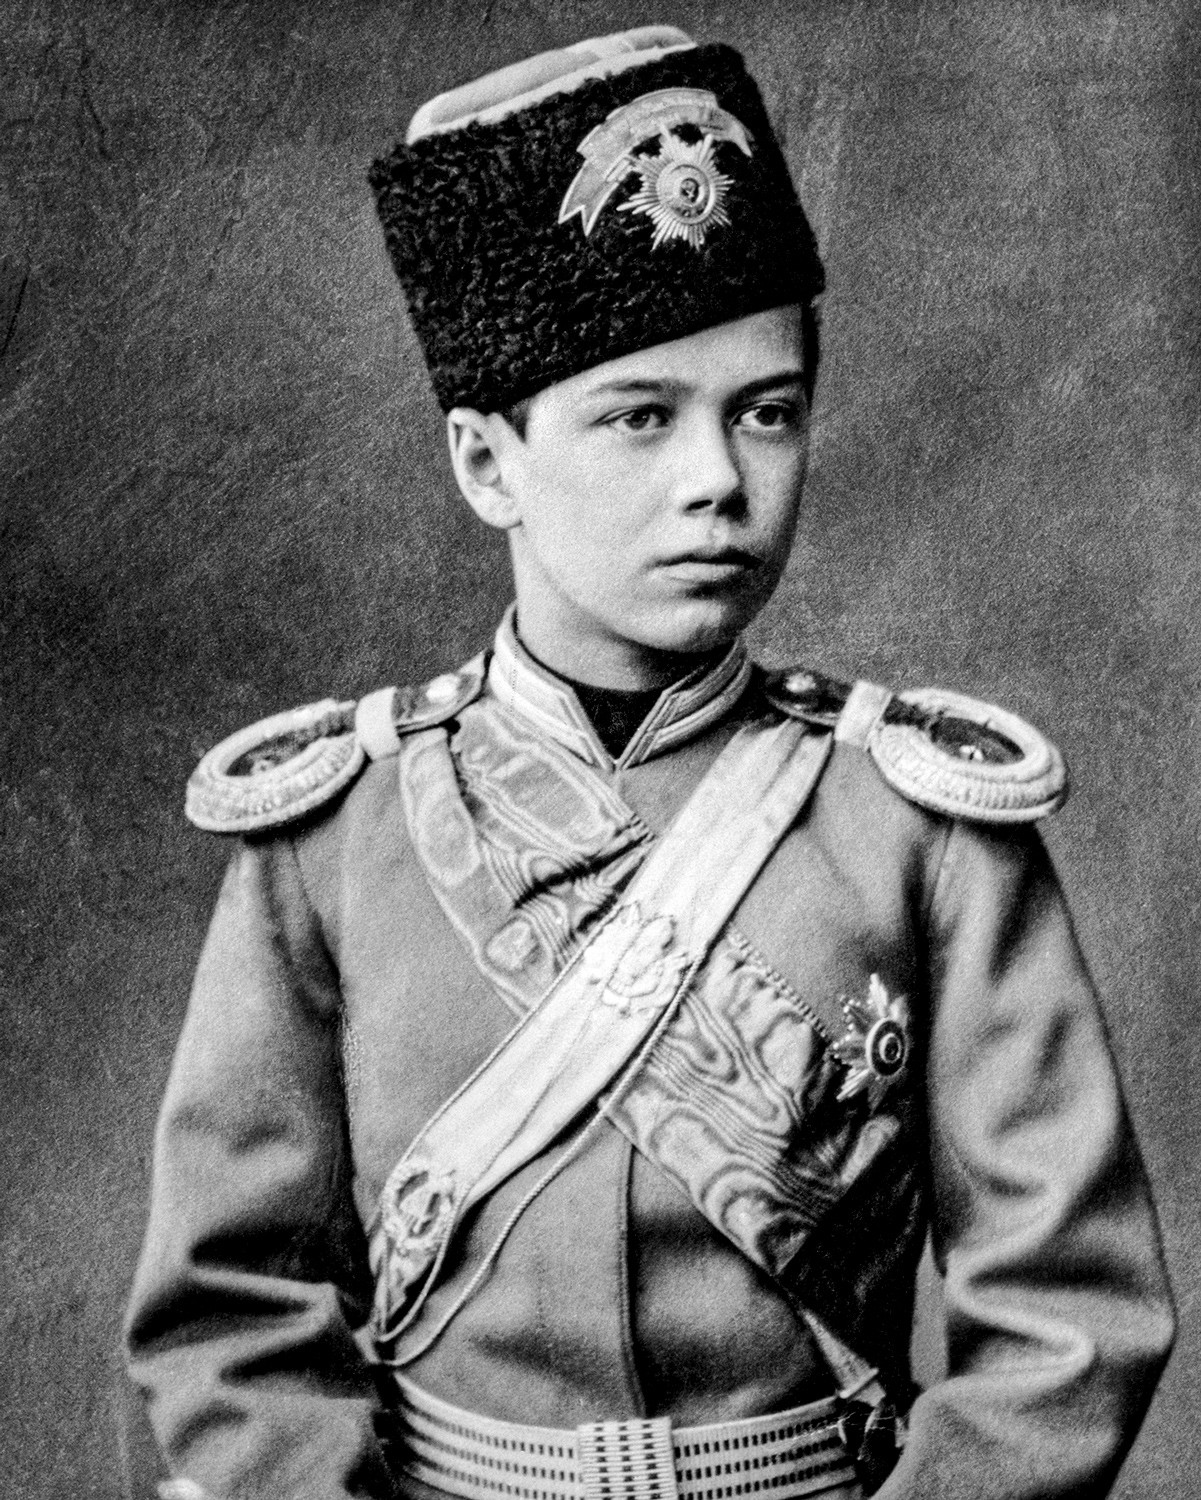 Nicholas II in uniform of Russian Army, when 13 years old. Photograph, ca. 1890.